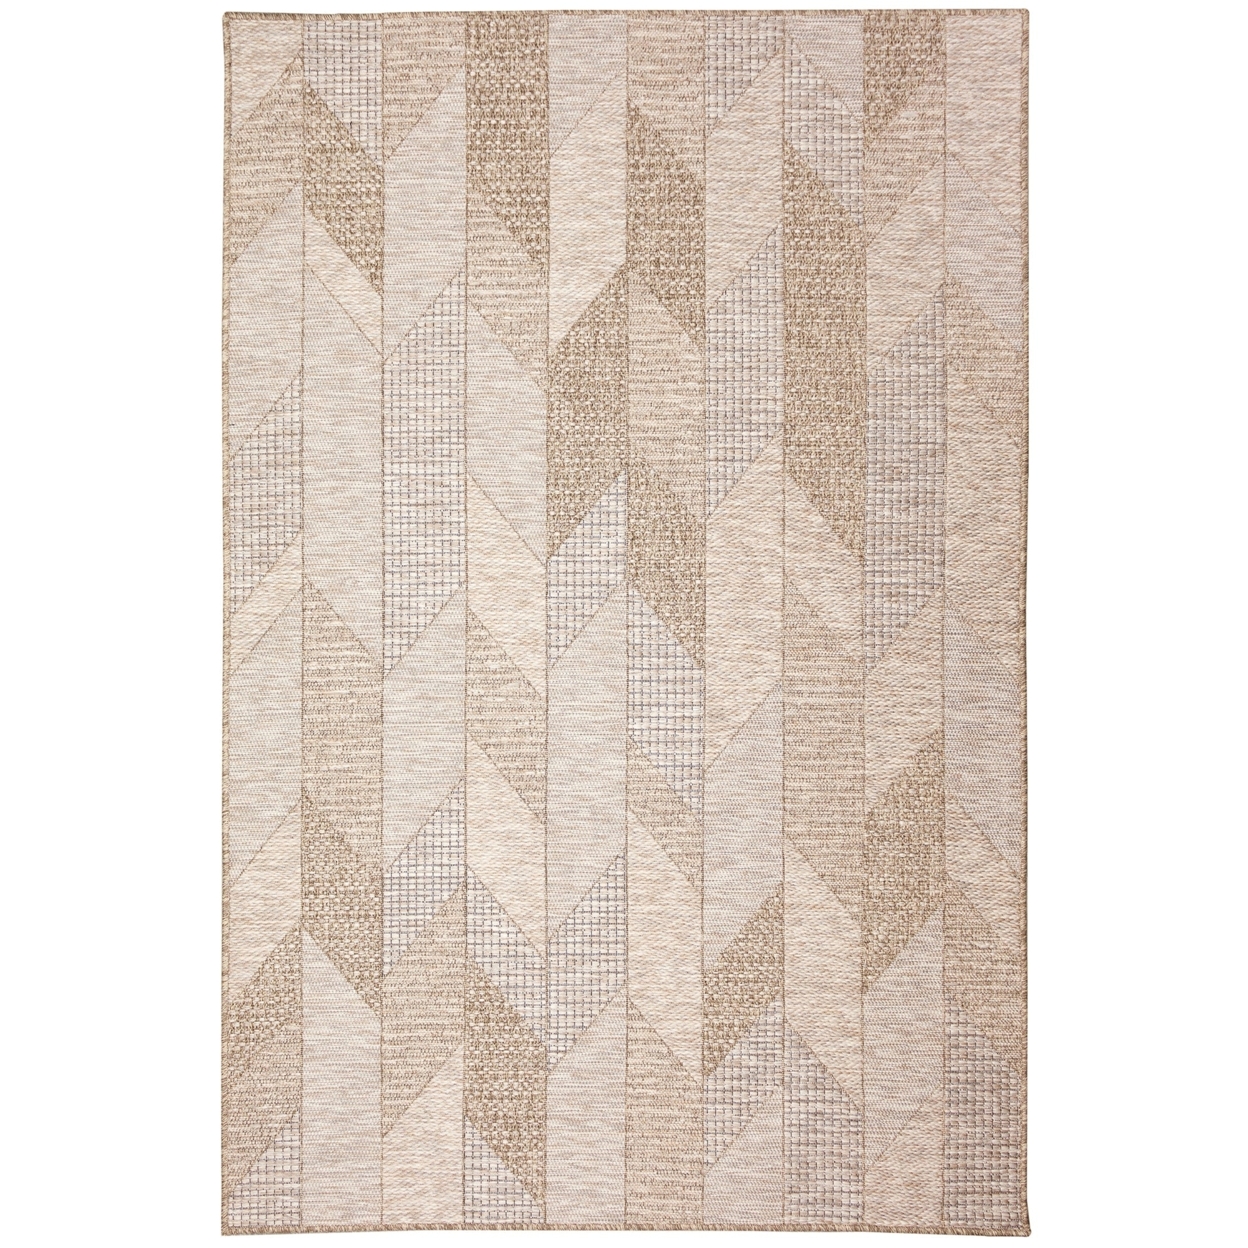 Liora Manne Orly Angles Indoor Outdoor Area Rug Natural - 6'6 X 9'3